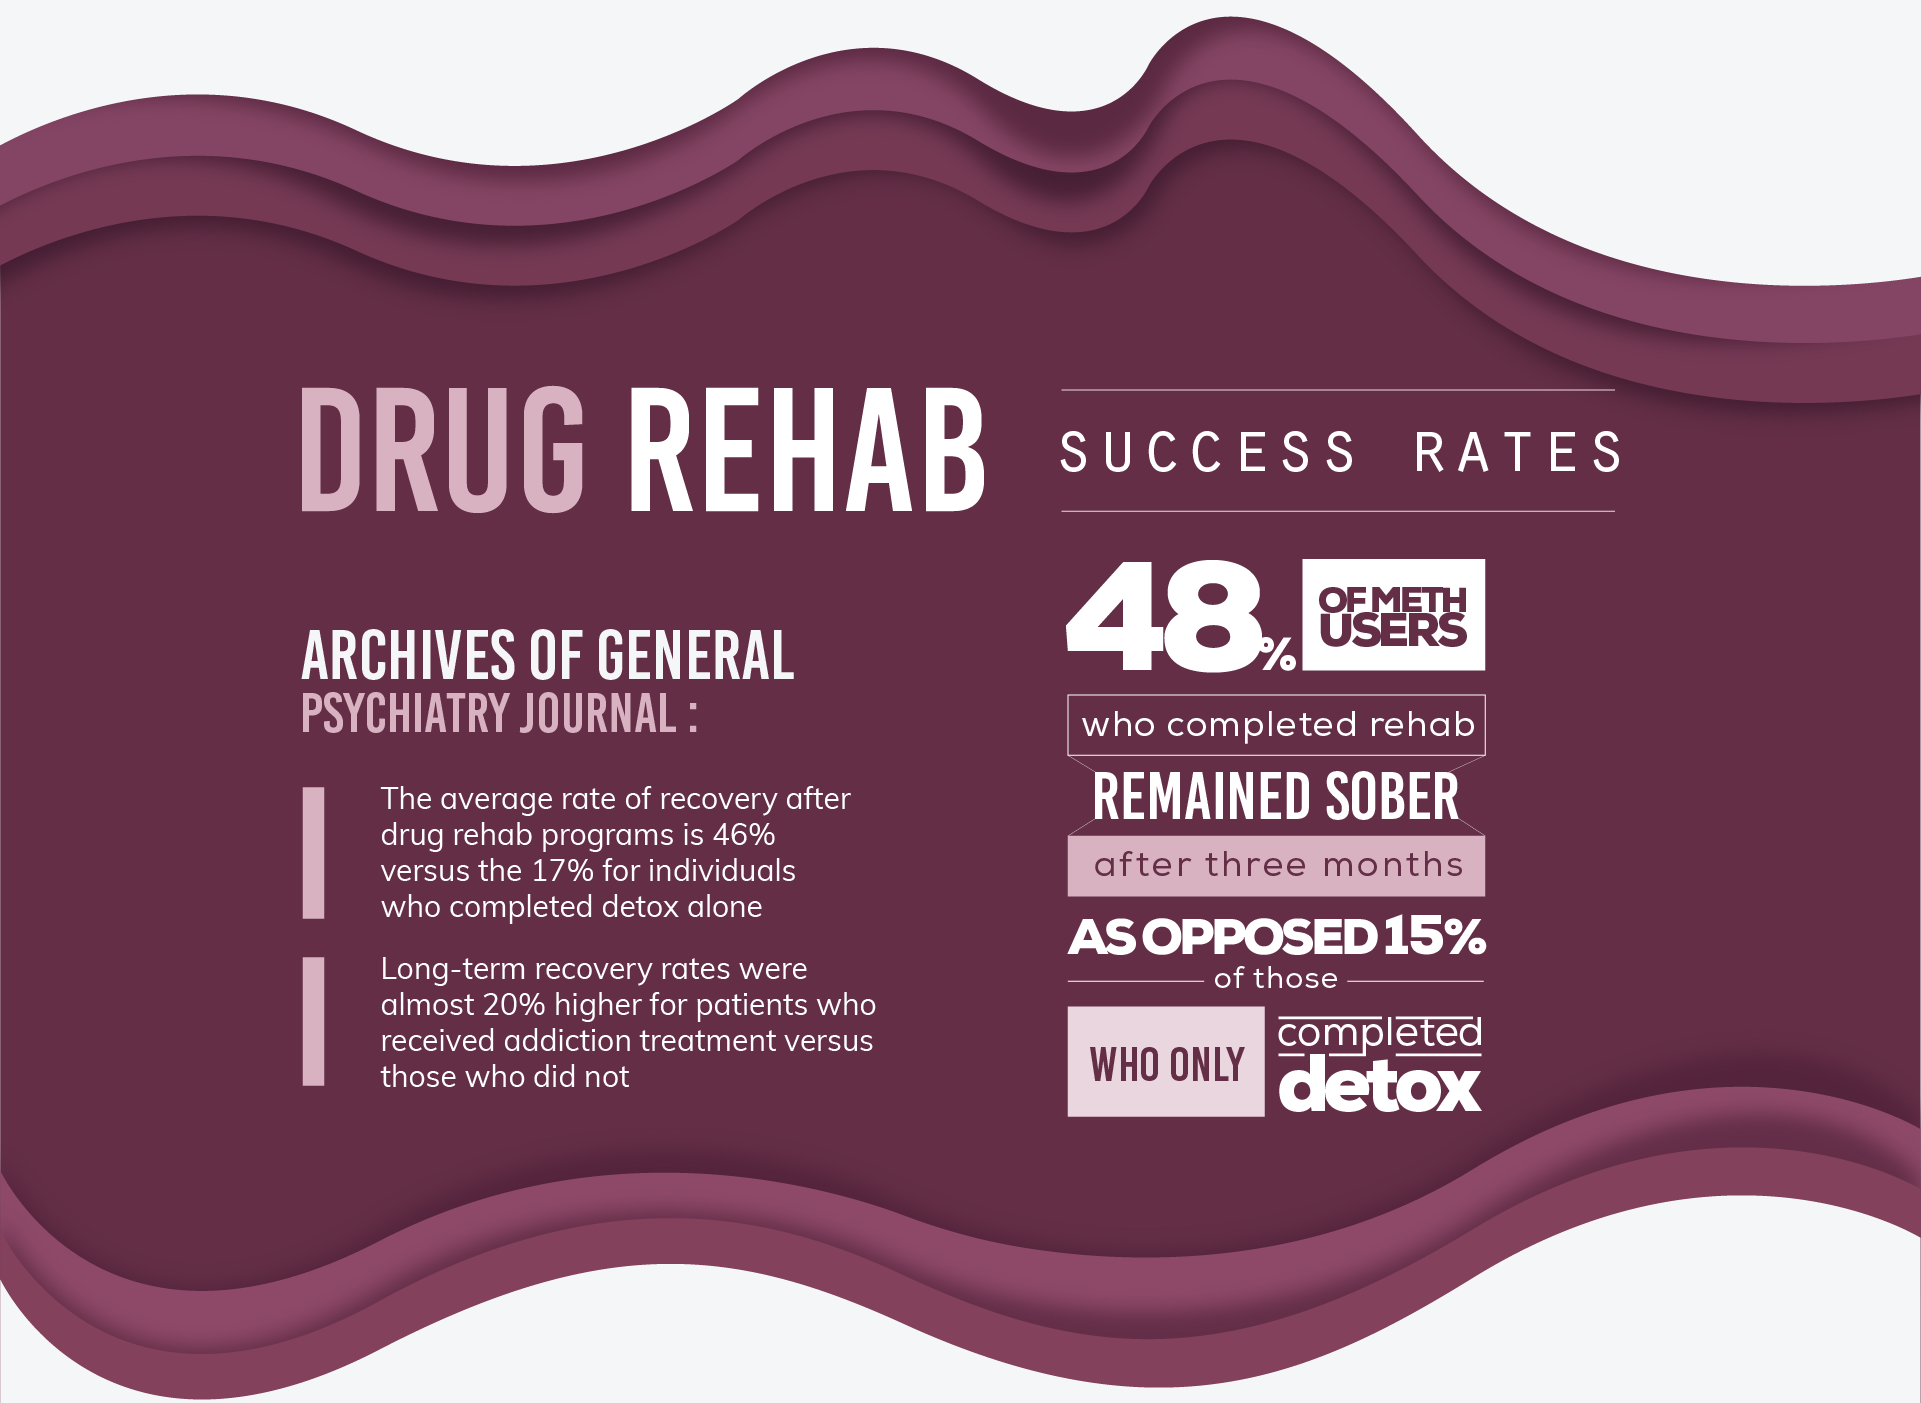 The average rate of recovery ater drug rehab programs is 46% versus the 17% for individuals who completed detox alone. Long-term recovery rates were almost 20% higher for patients who received addiction treatment versus those who did not.48% of meth users who completed rehab remained sober after three months as opposed 15% of those who only completed detox